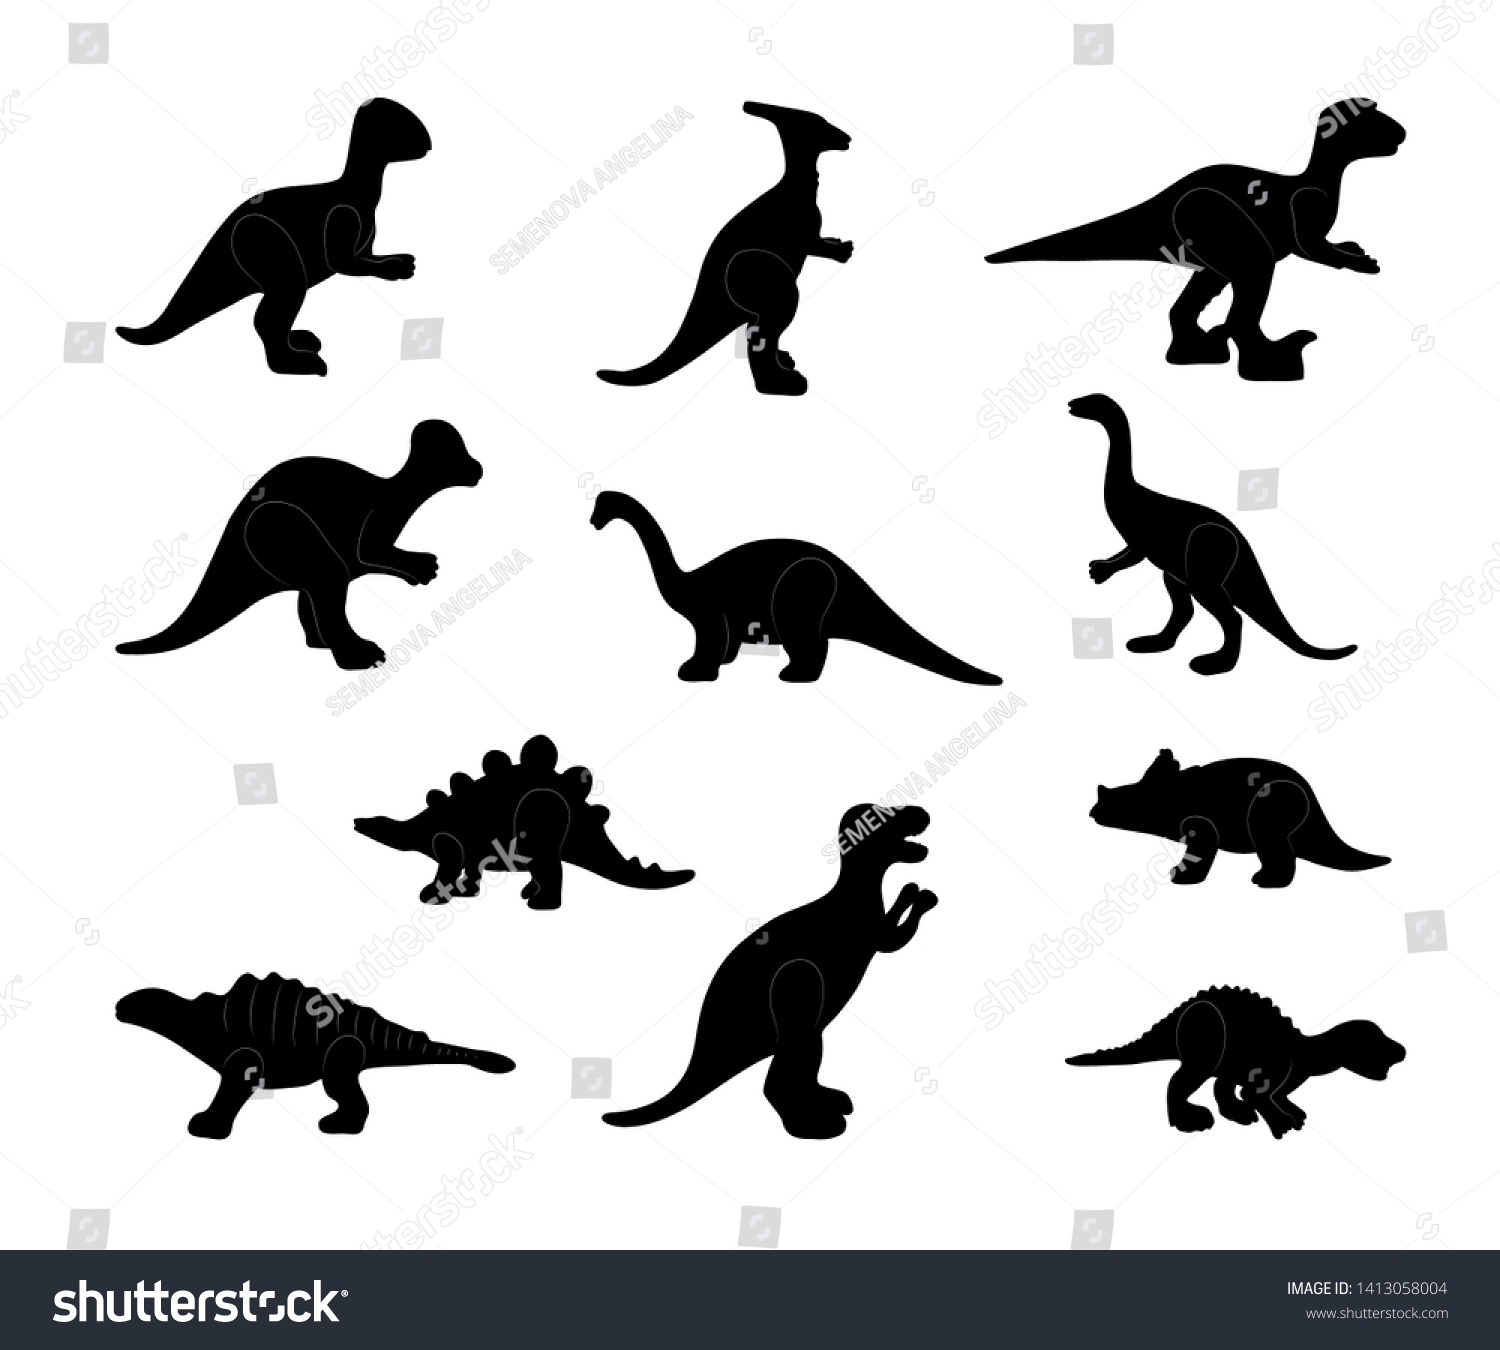 SVG of Set of black silhouette of dinosaurs on white background. Collection various forms, pose, type. Stand, sits, walks. Elements for design, print. Vector illustration svg